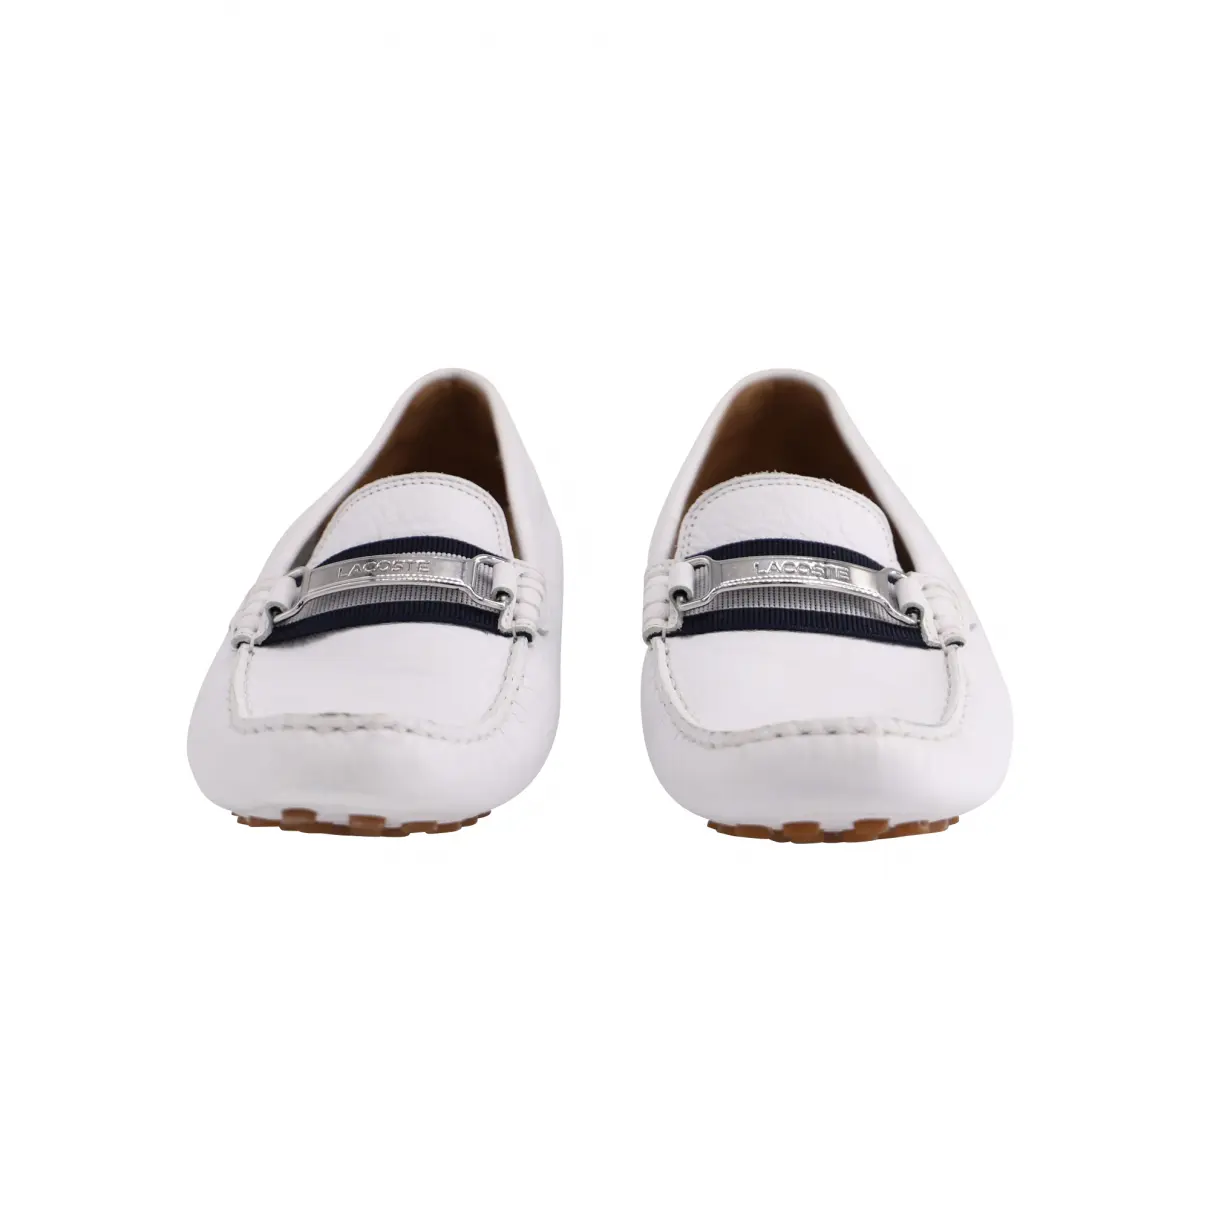 Buy Lacoste Leather flats online